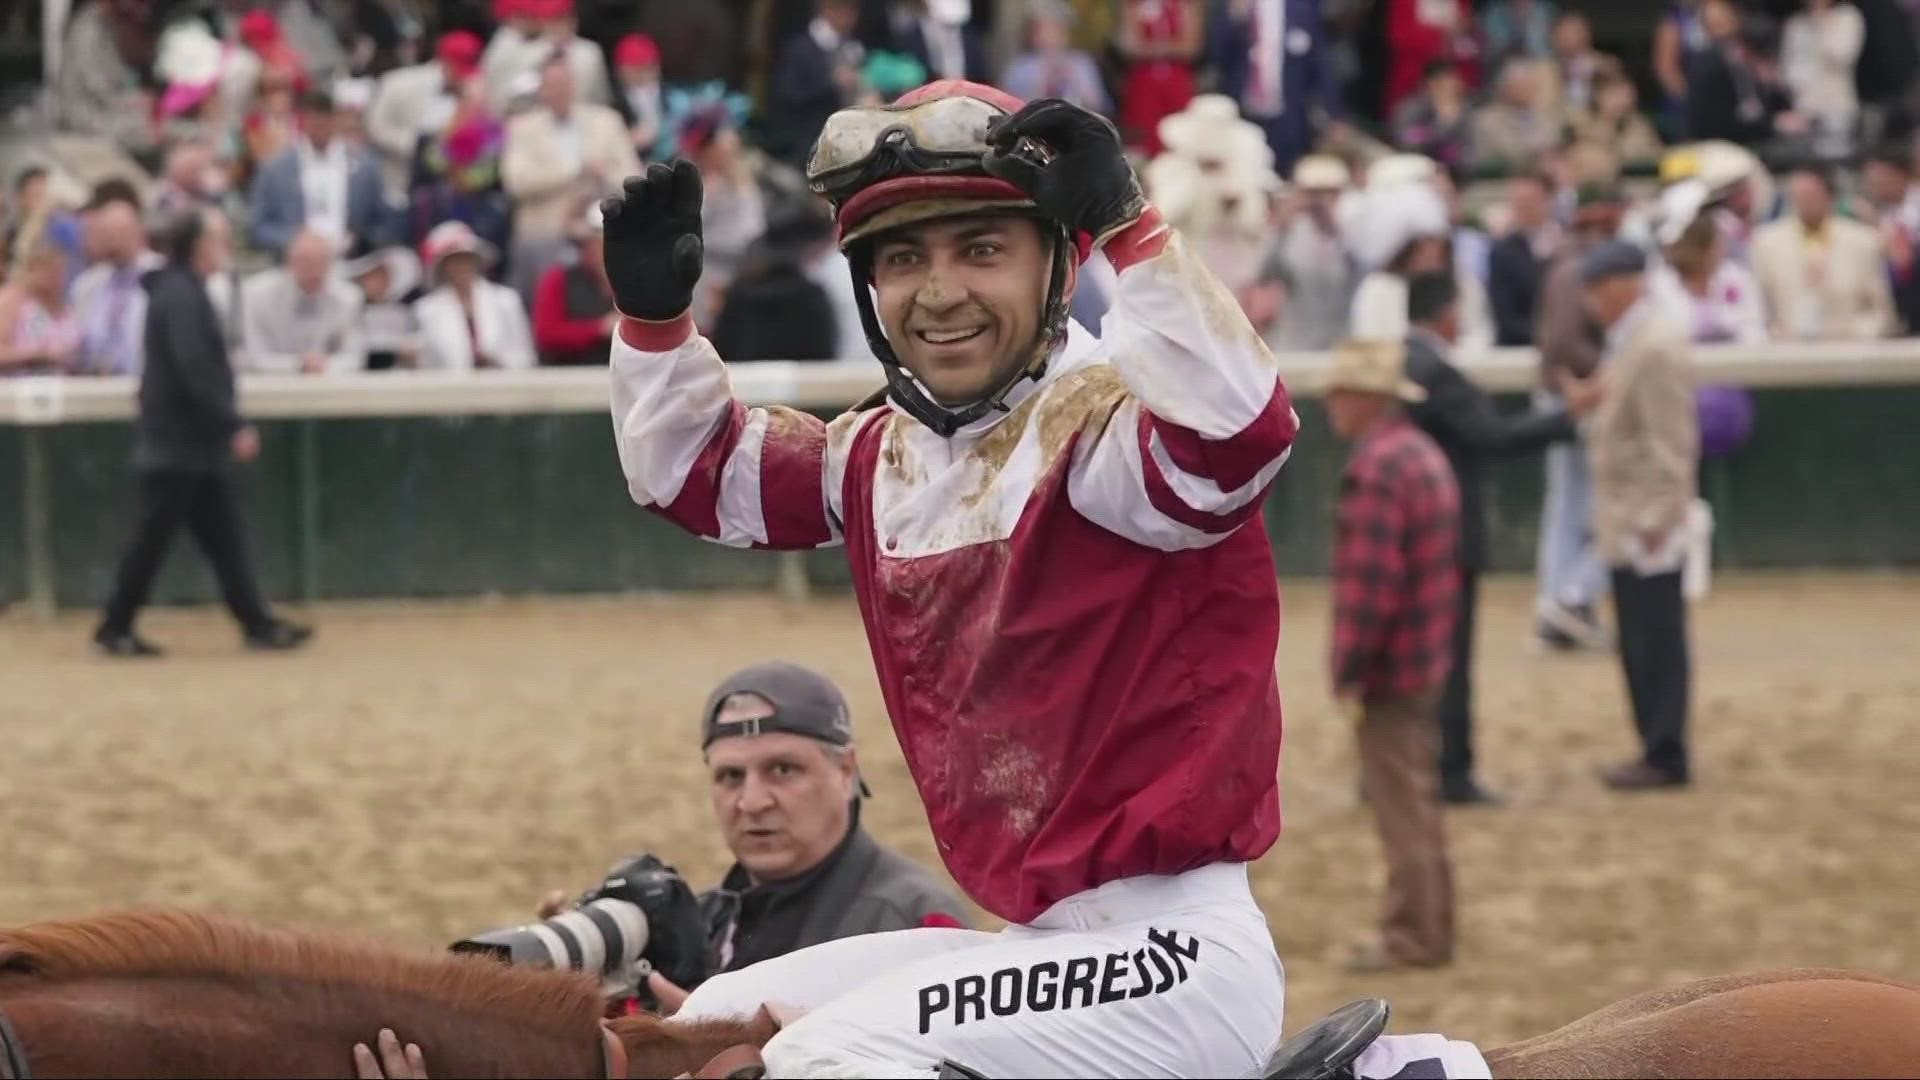 In 2016, Sonny Leon competed in his first race at JACK Thistledown and won. Six years later, Leon was crowned the Kentucky Derby champion riding Rich Strike.